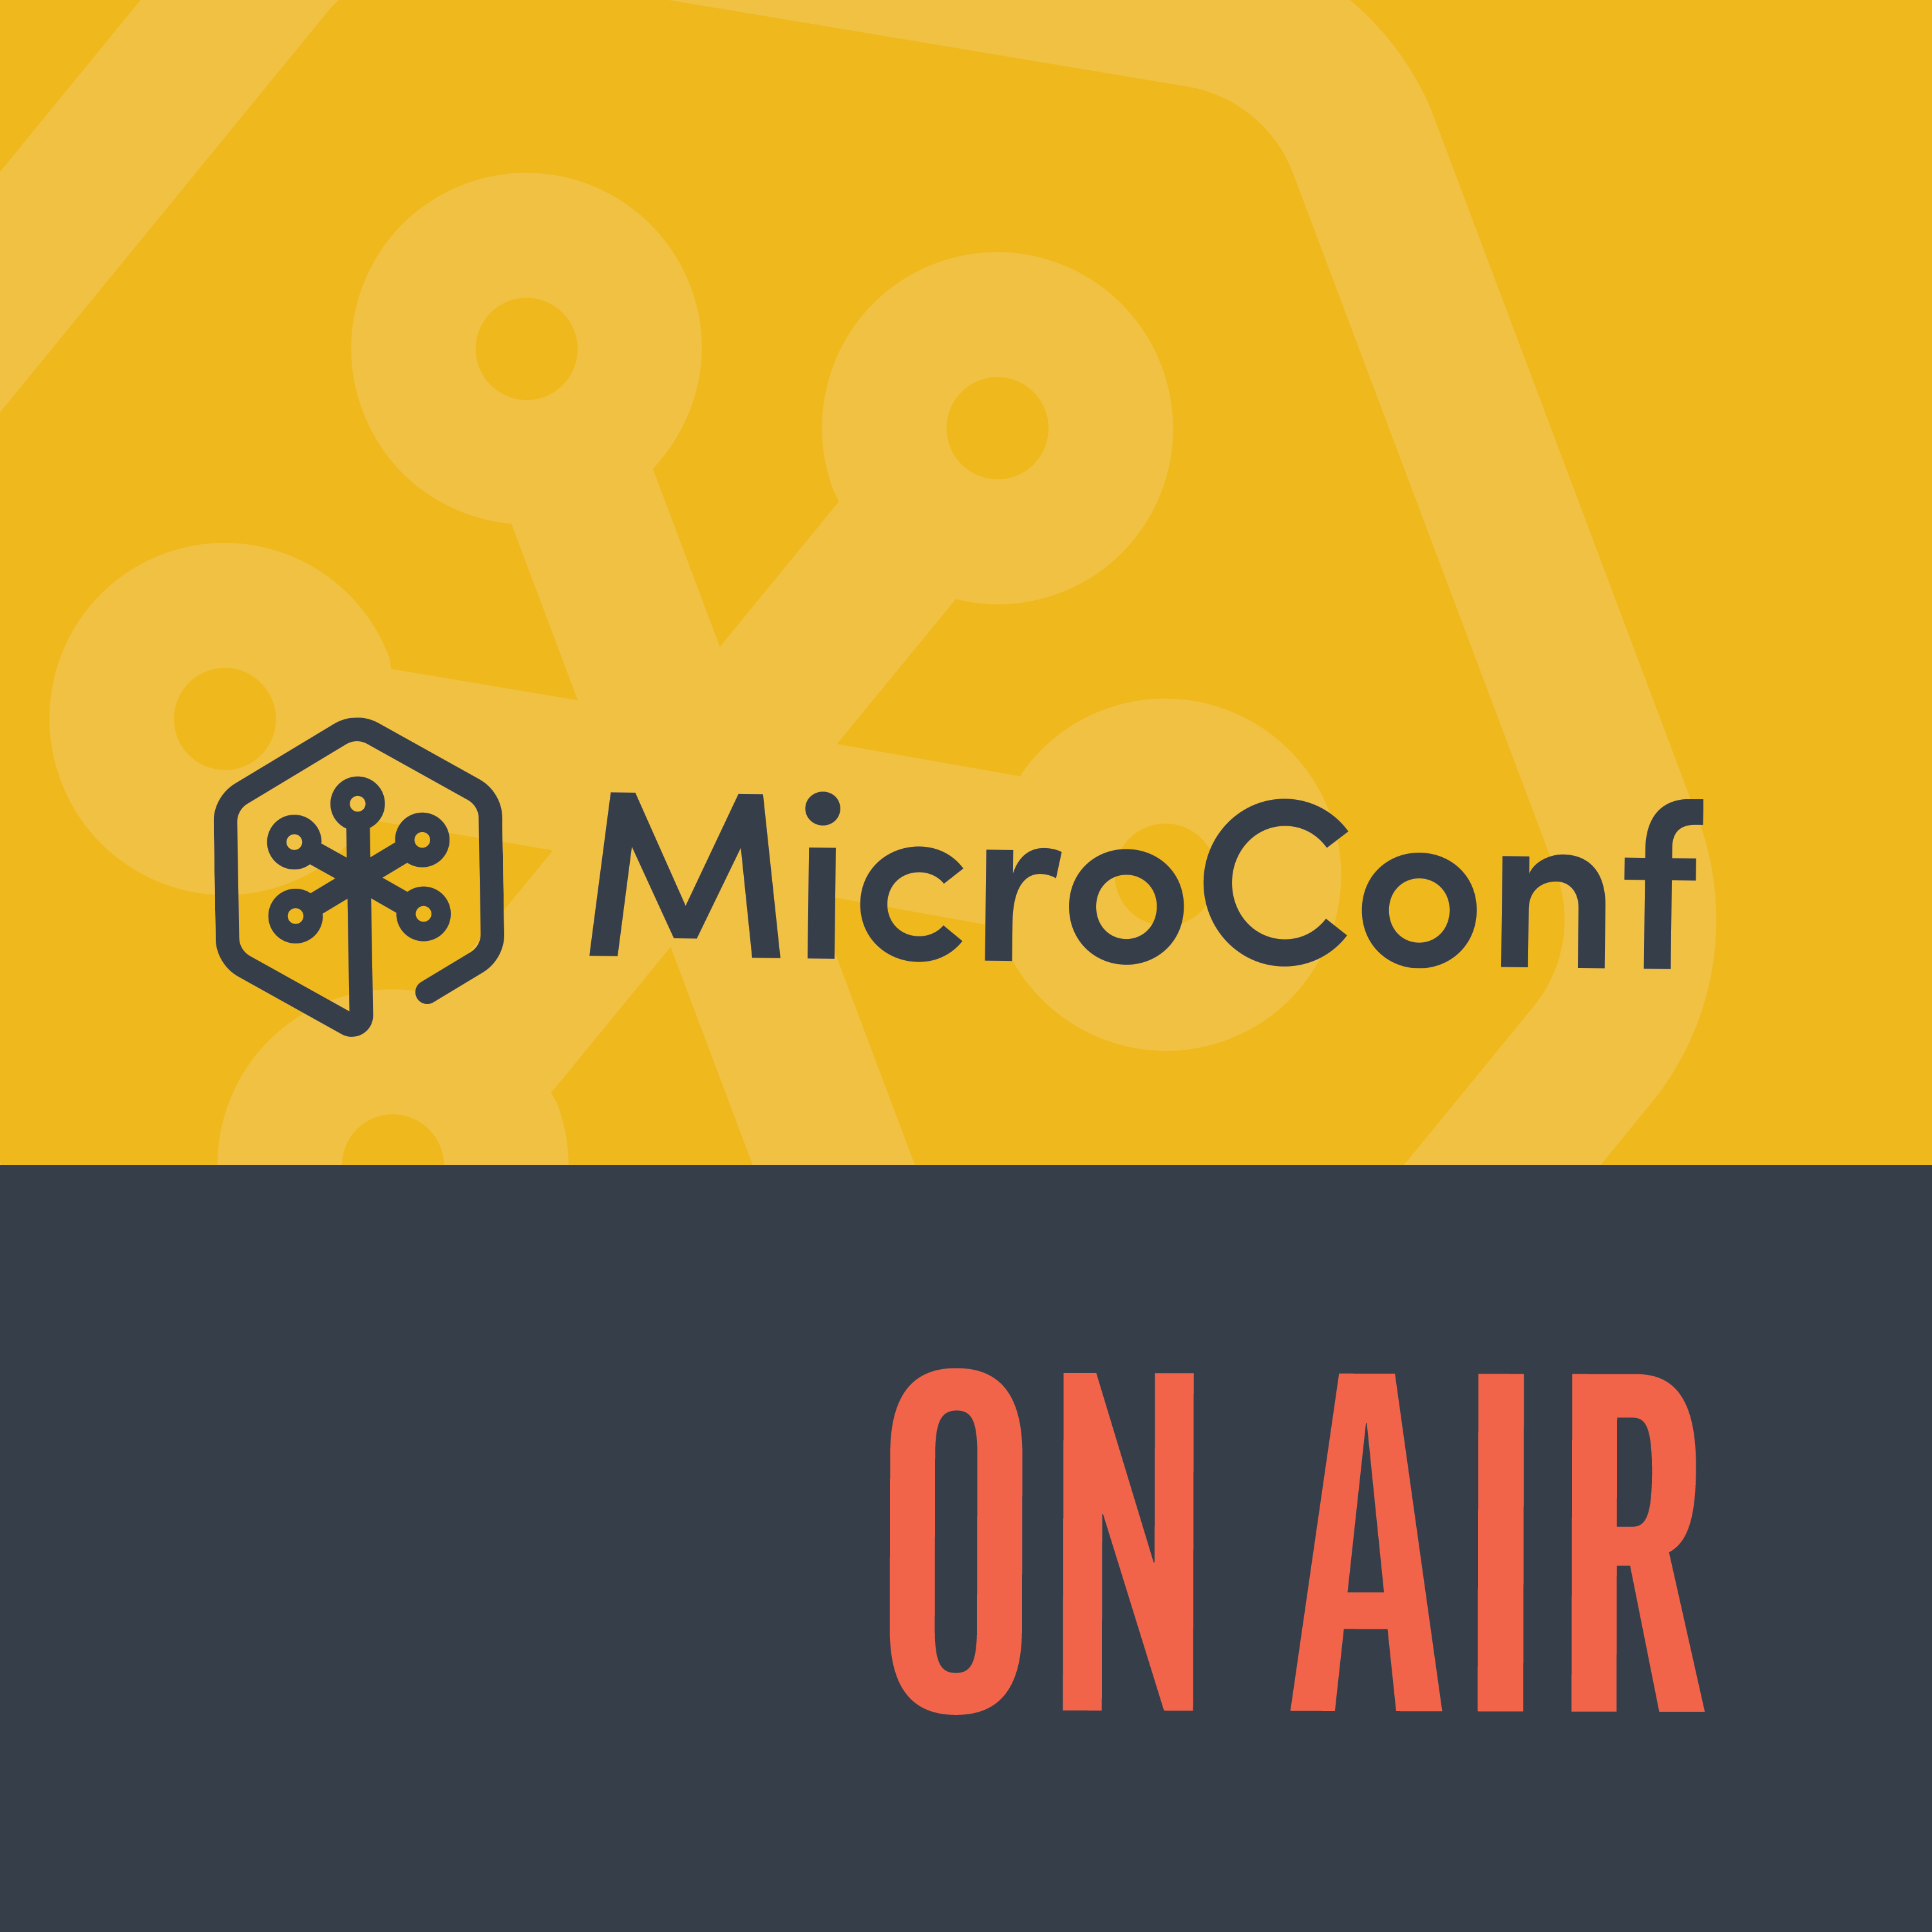 MicroConf Refresh Episode 30: Taking Down the Search Giants Helen Pollitt MicroConf Europe 2019